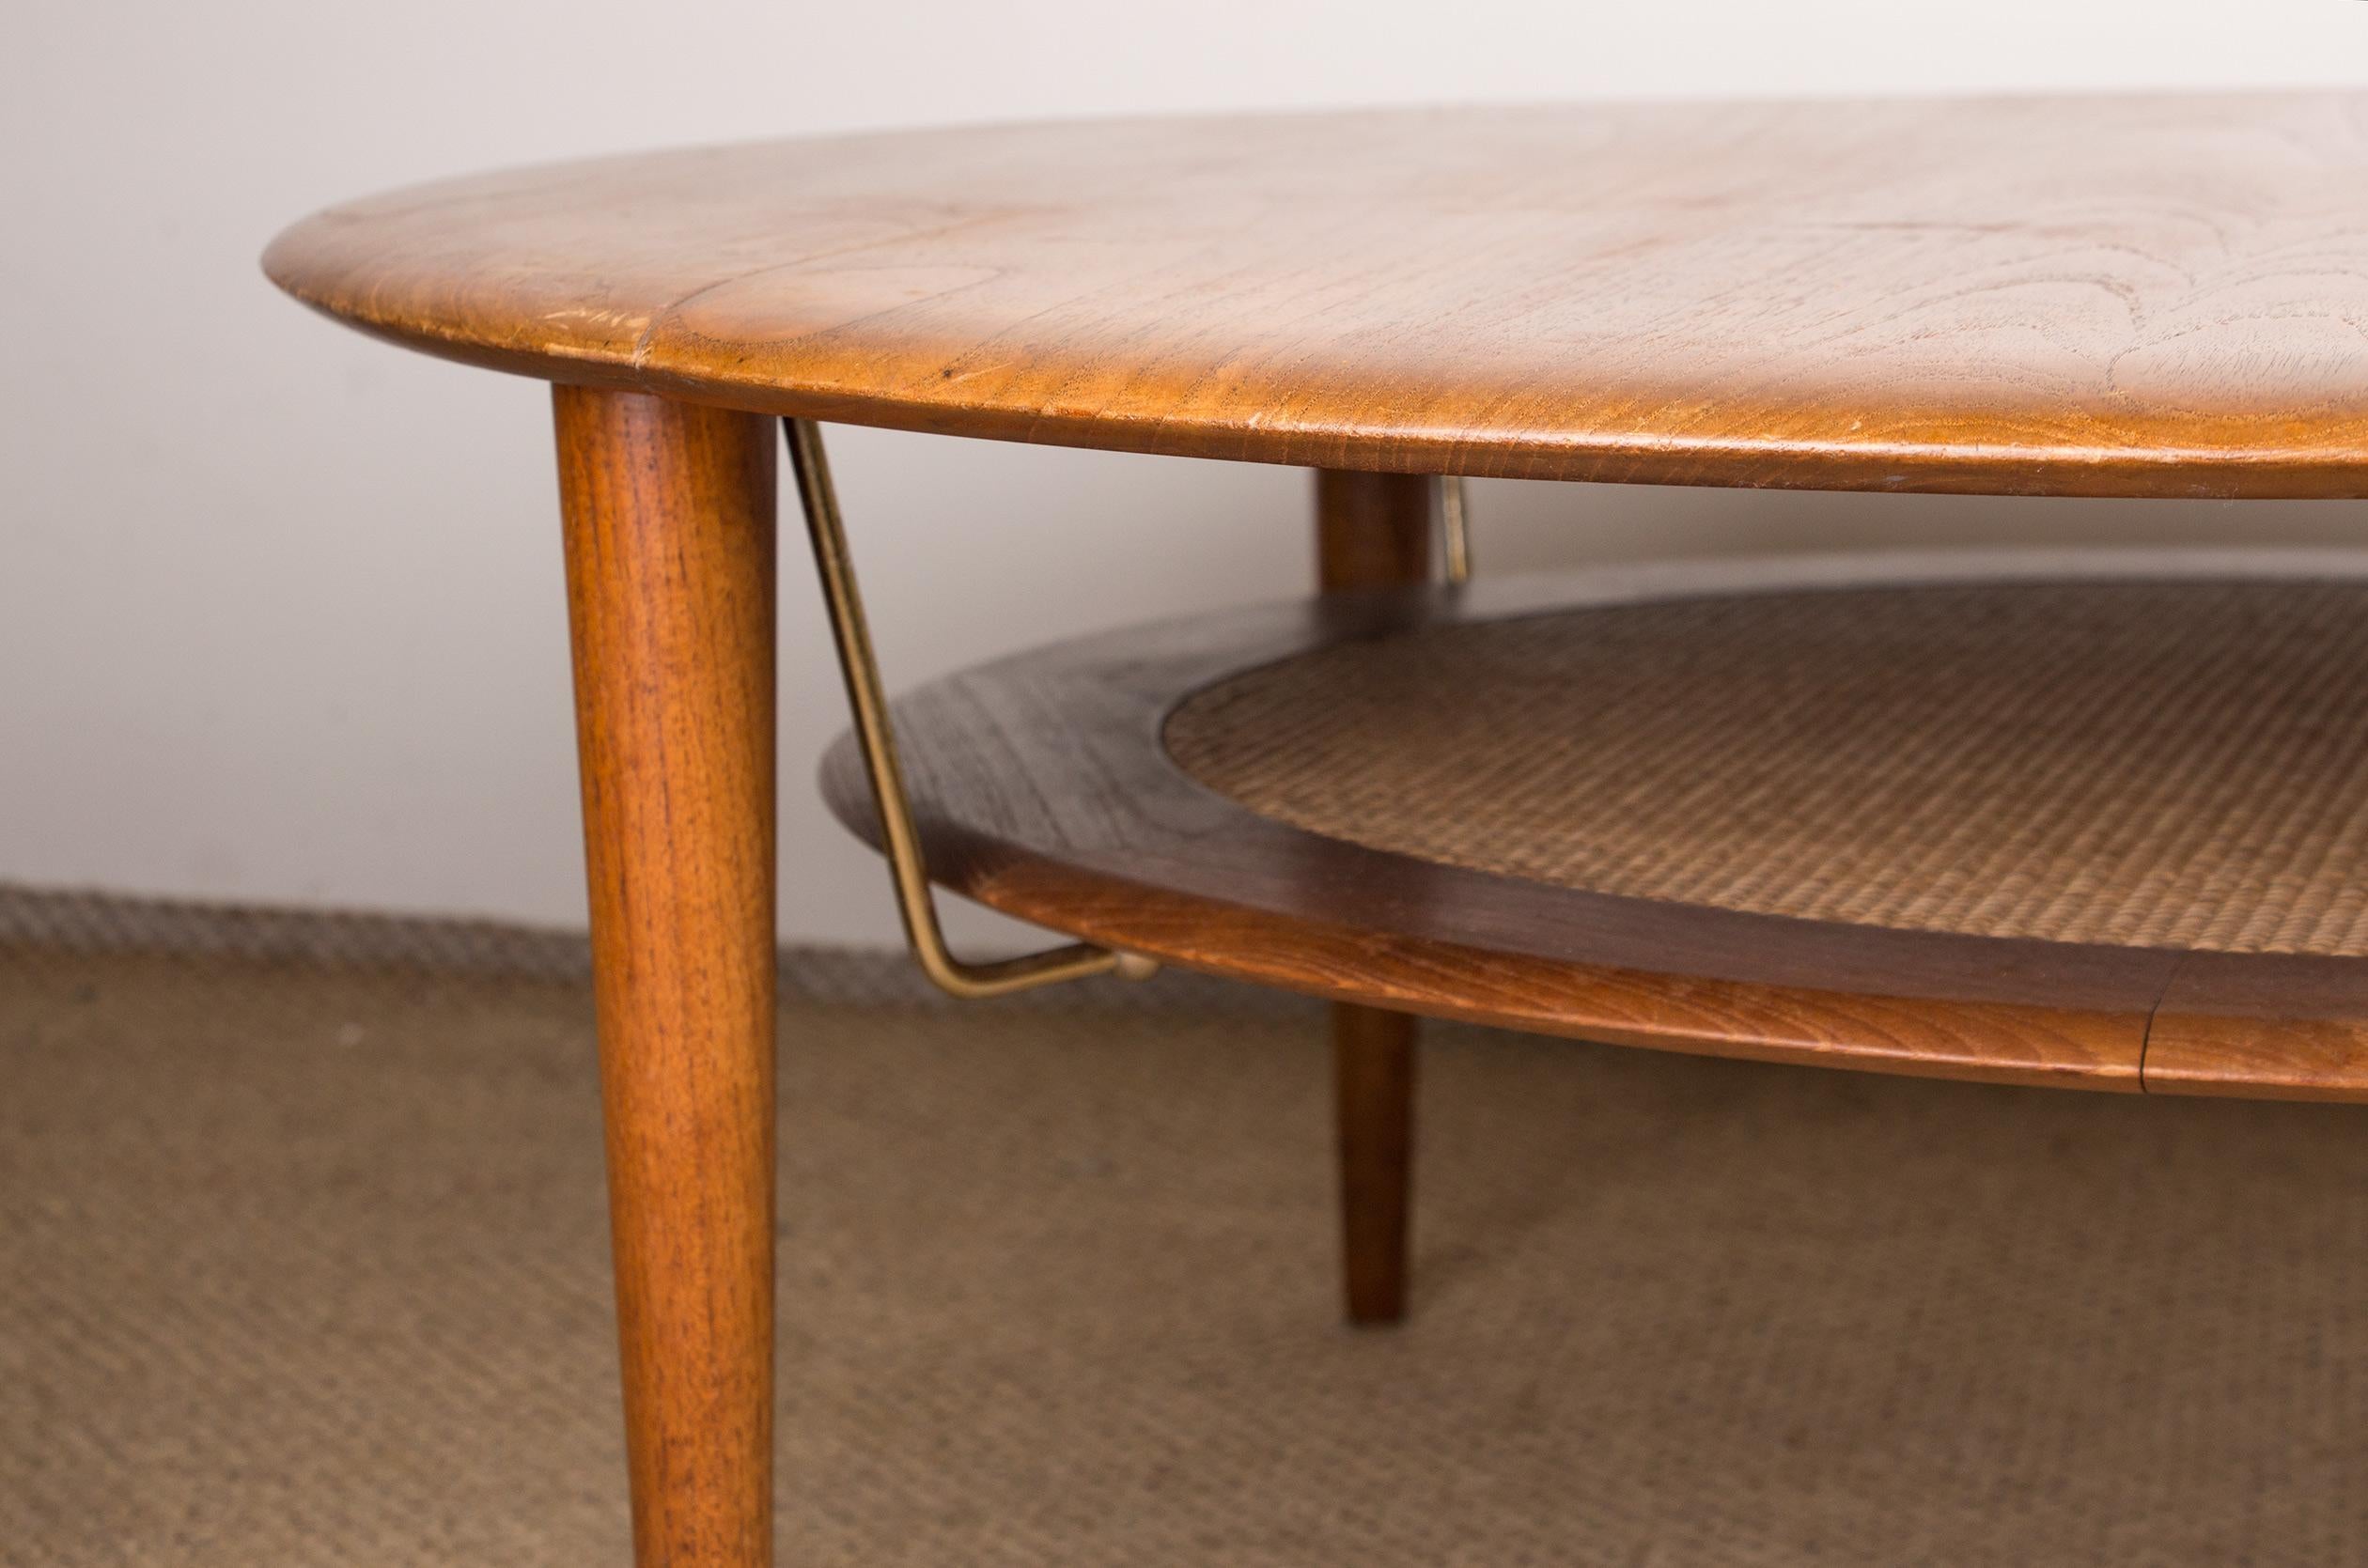 Danish Teak, Brass and Cane FD 515 Round 2-Tier Coffee Table by Peter Hvidt 1